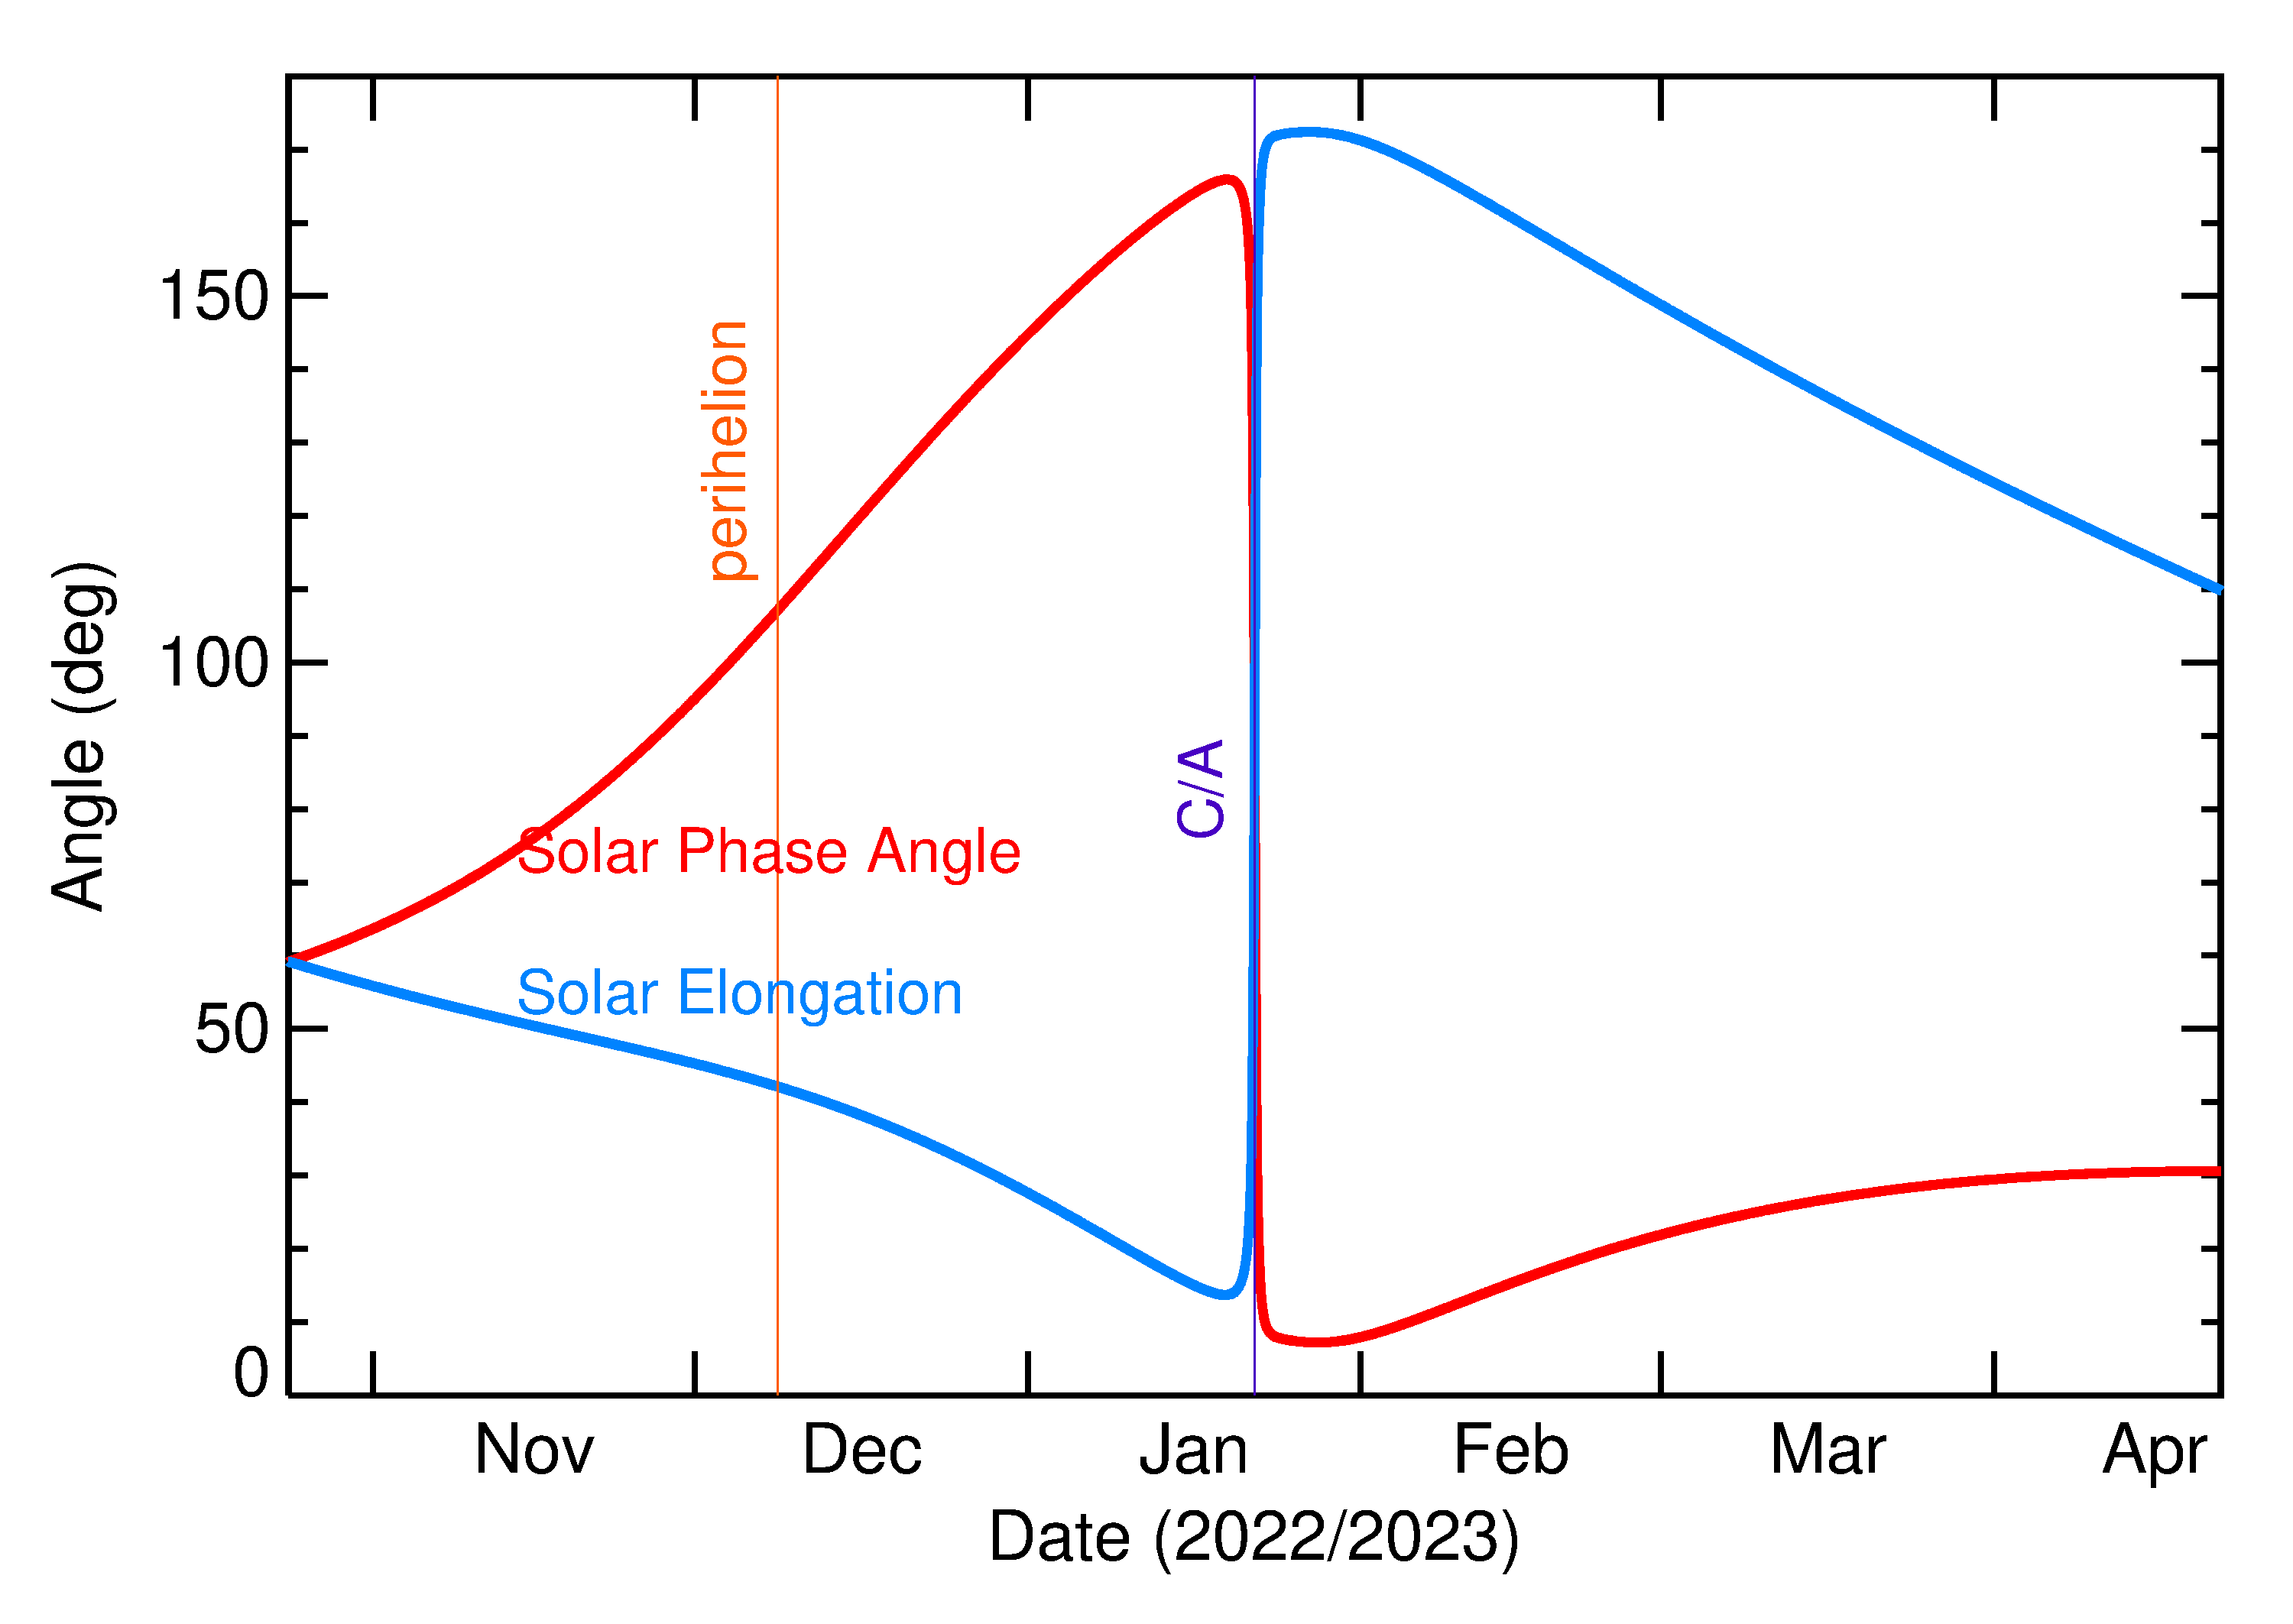 Solar Elongation and Solar Phase Angle of 2023 BY2 in the months around closest approach